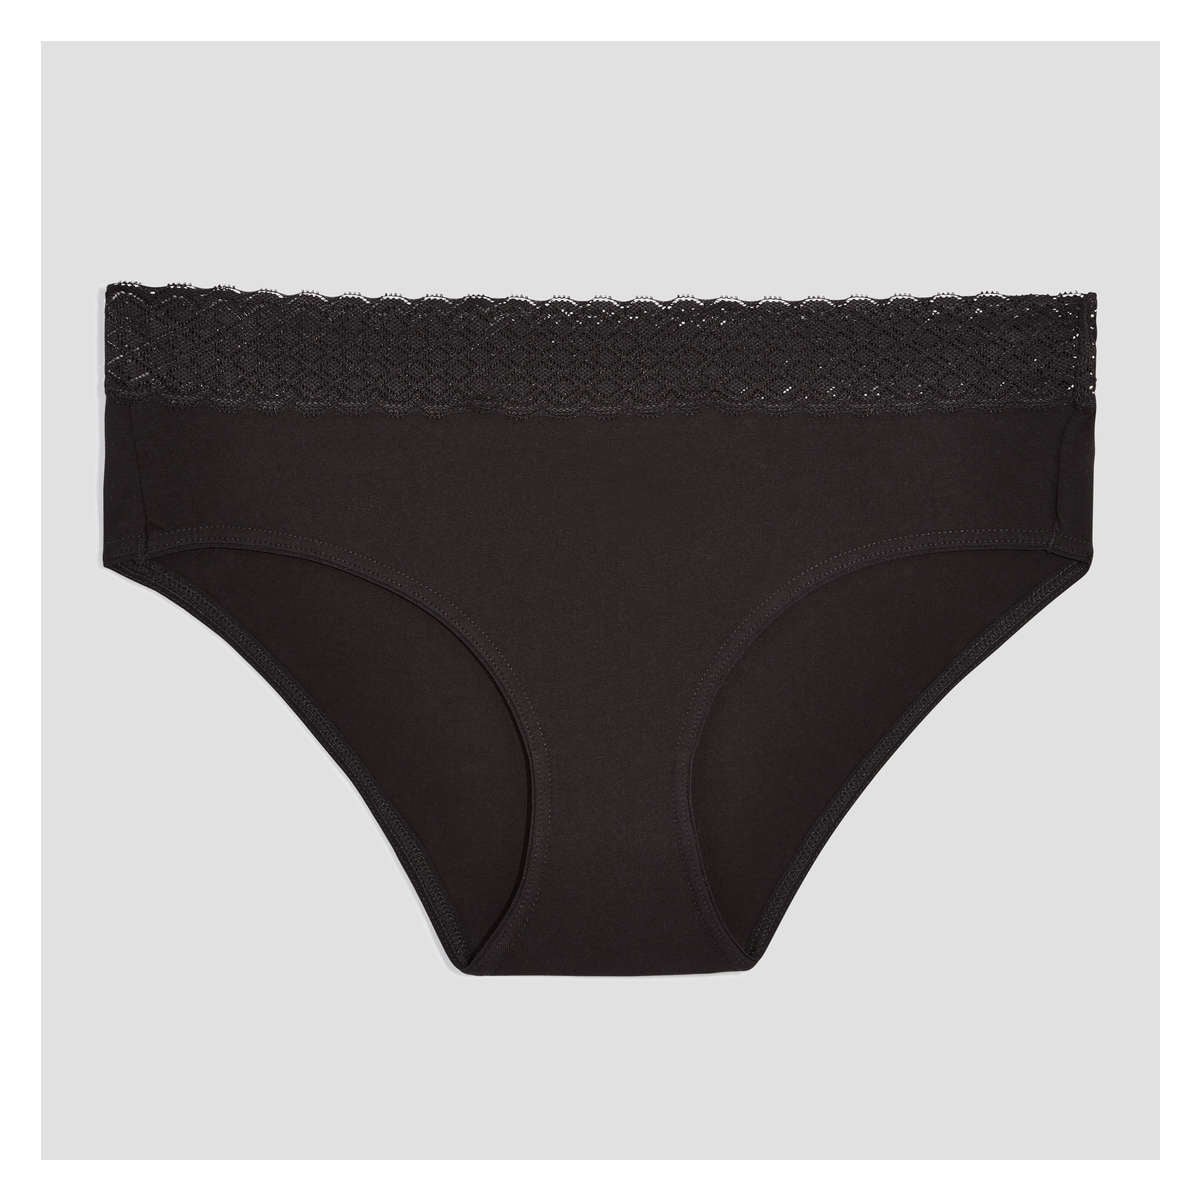 Buy ULTIMO Women's Lace Hipster Briefs